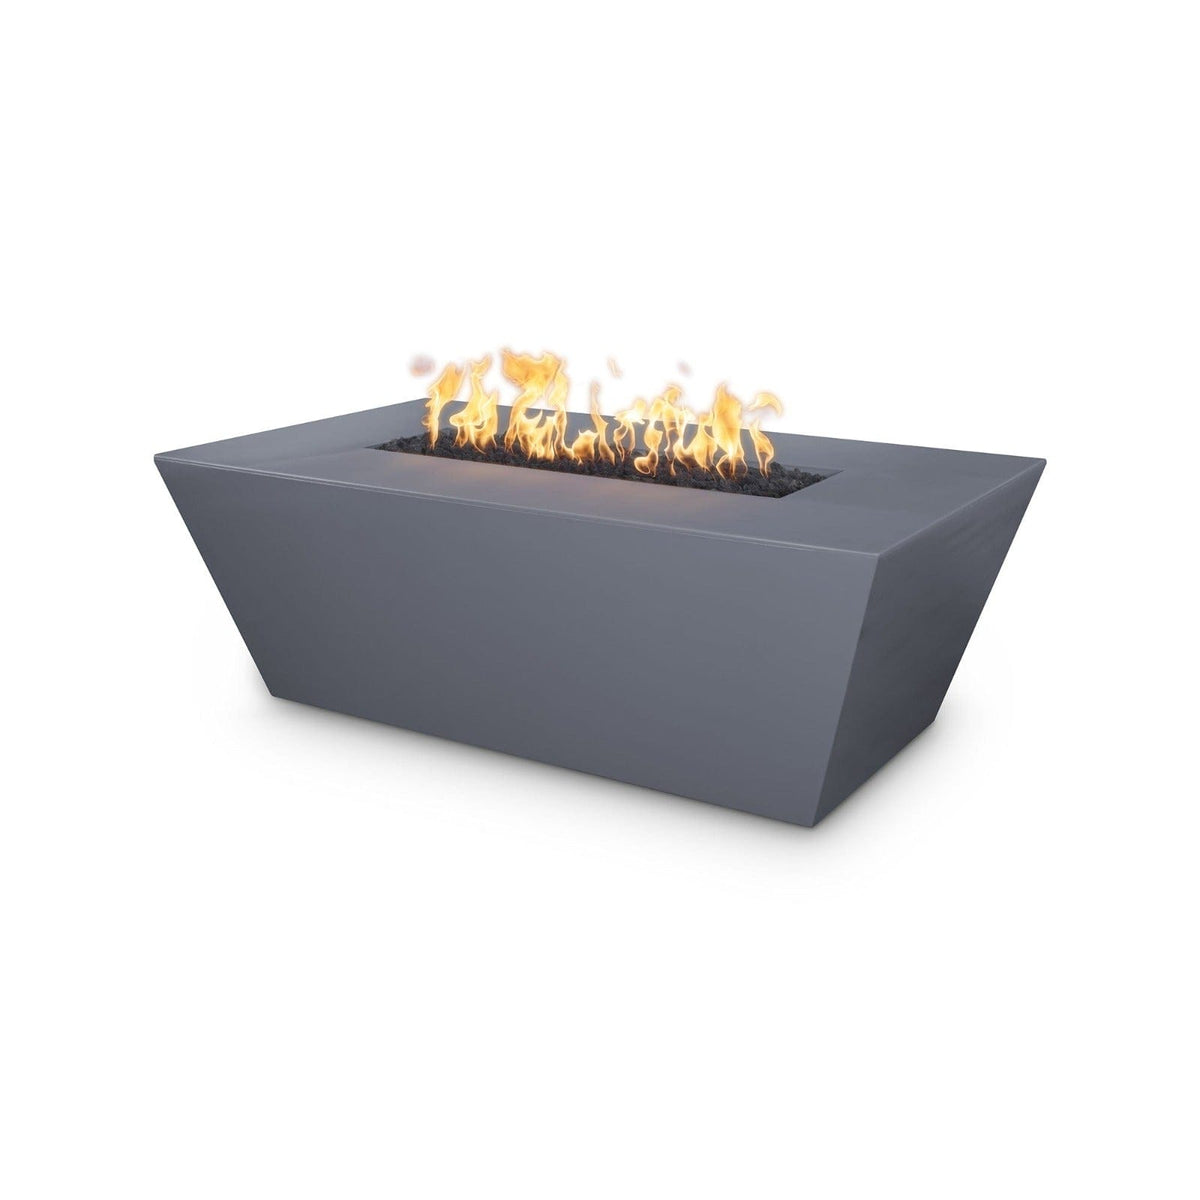 The Outdoor Plus Fire Features Gray (-GRY) / Match Lit Ignition / Liquid Propane The Outdoor Plus 60&quot; Rectangular Angelus Fire Pit in Solid Concrete Finishes - GFRC Concrete / OPT-AGLGF60, OPT-AGLGF60FSML, OPT-AGLGF60FSEN, OPT-AGLGF60E12V, OPT-AGLGF60EKIT